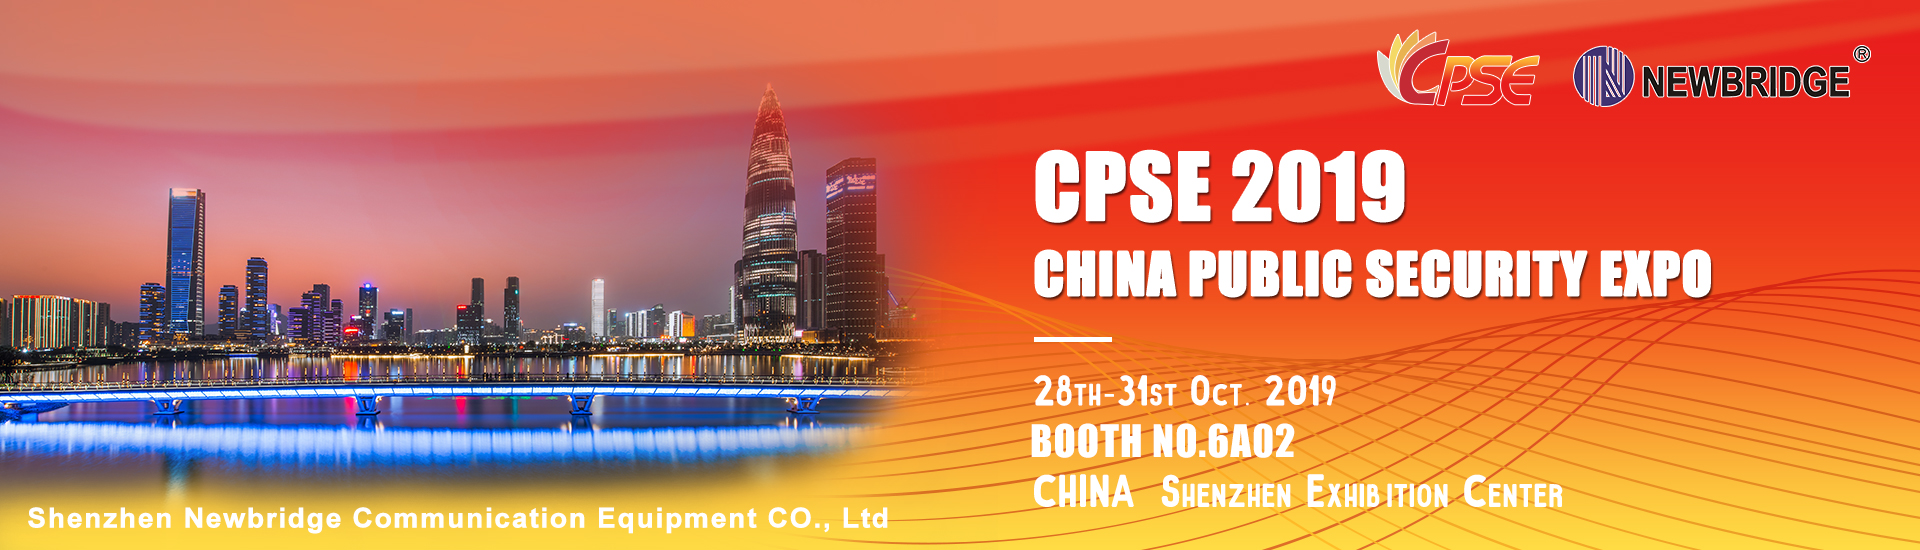 We will attend the CPSE（CHINA PUBLIC SECURITY EXPO）on 28t